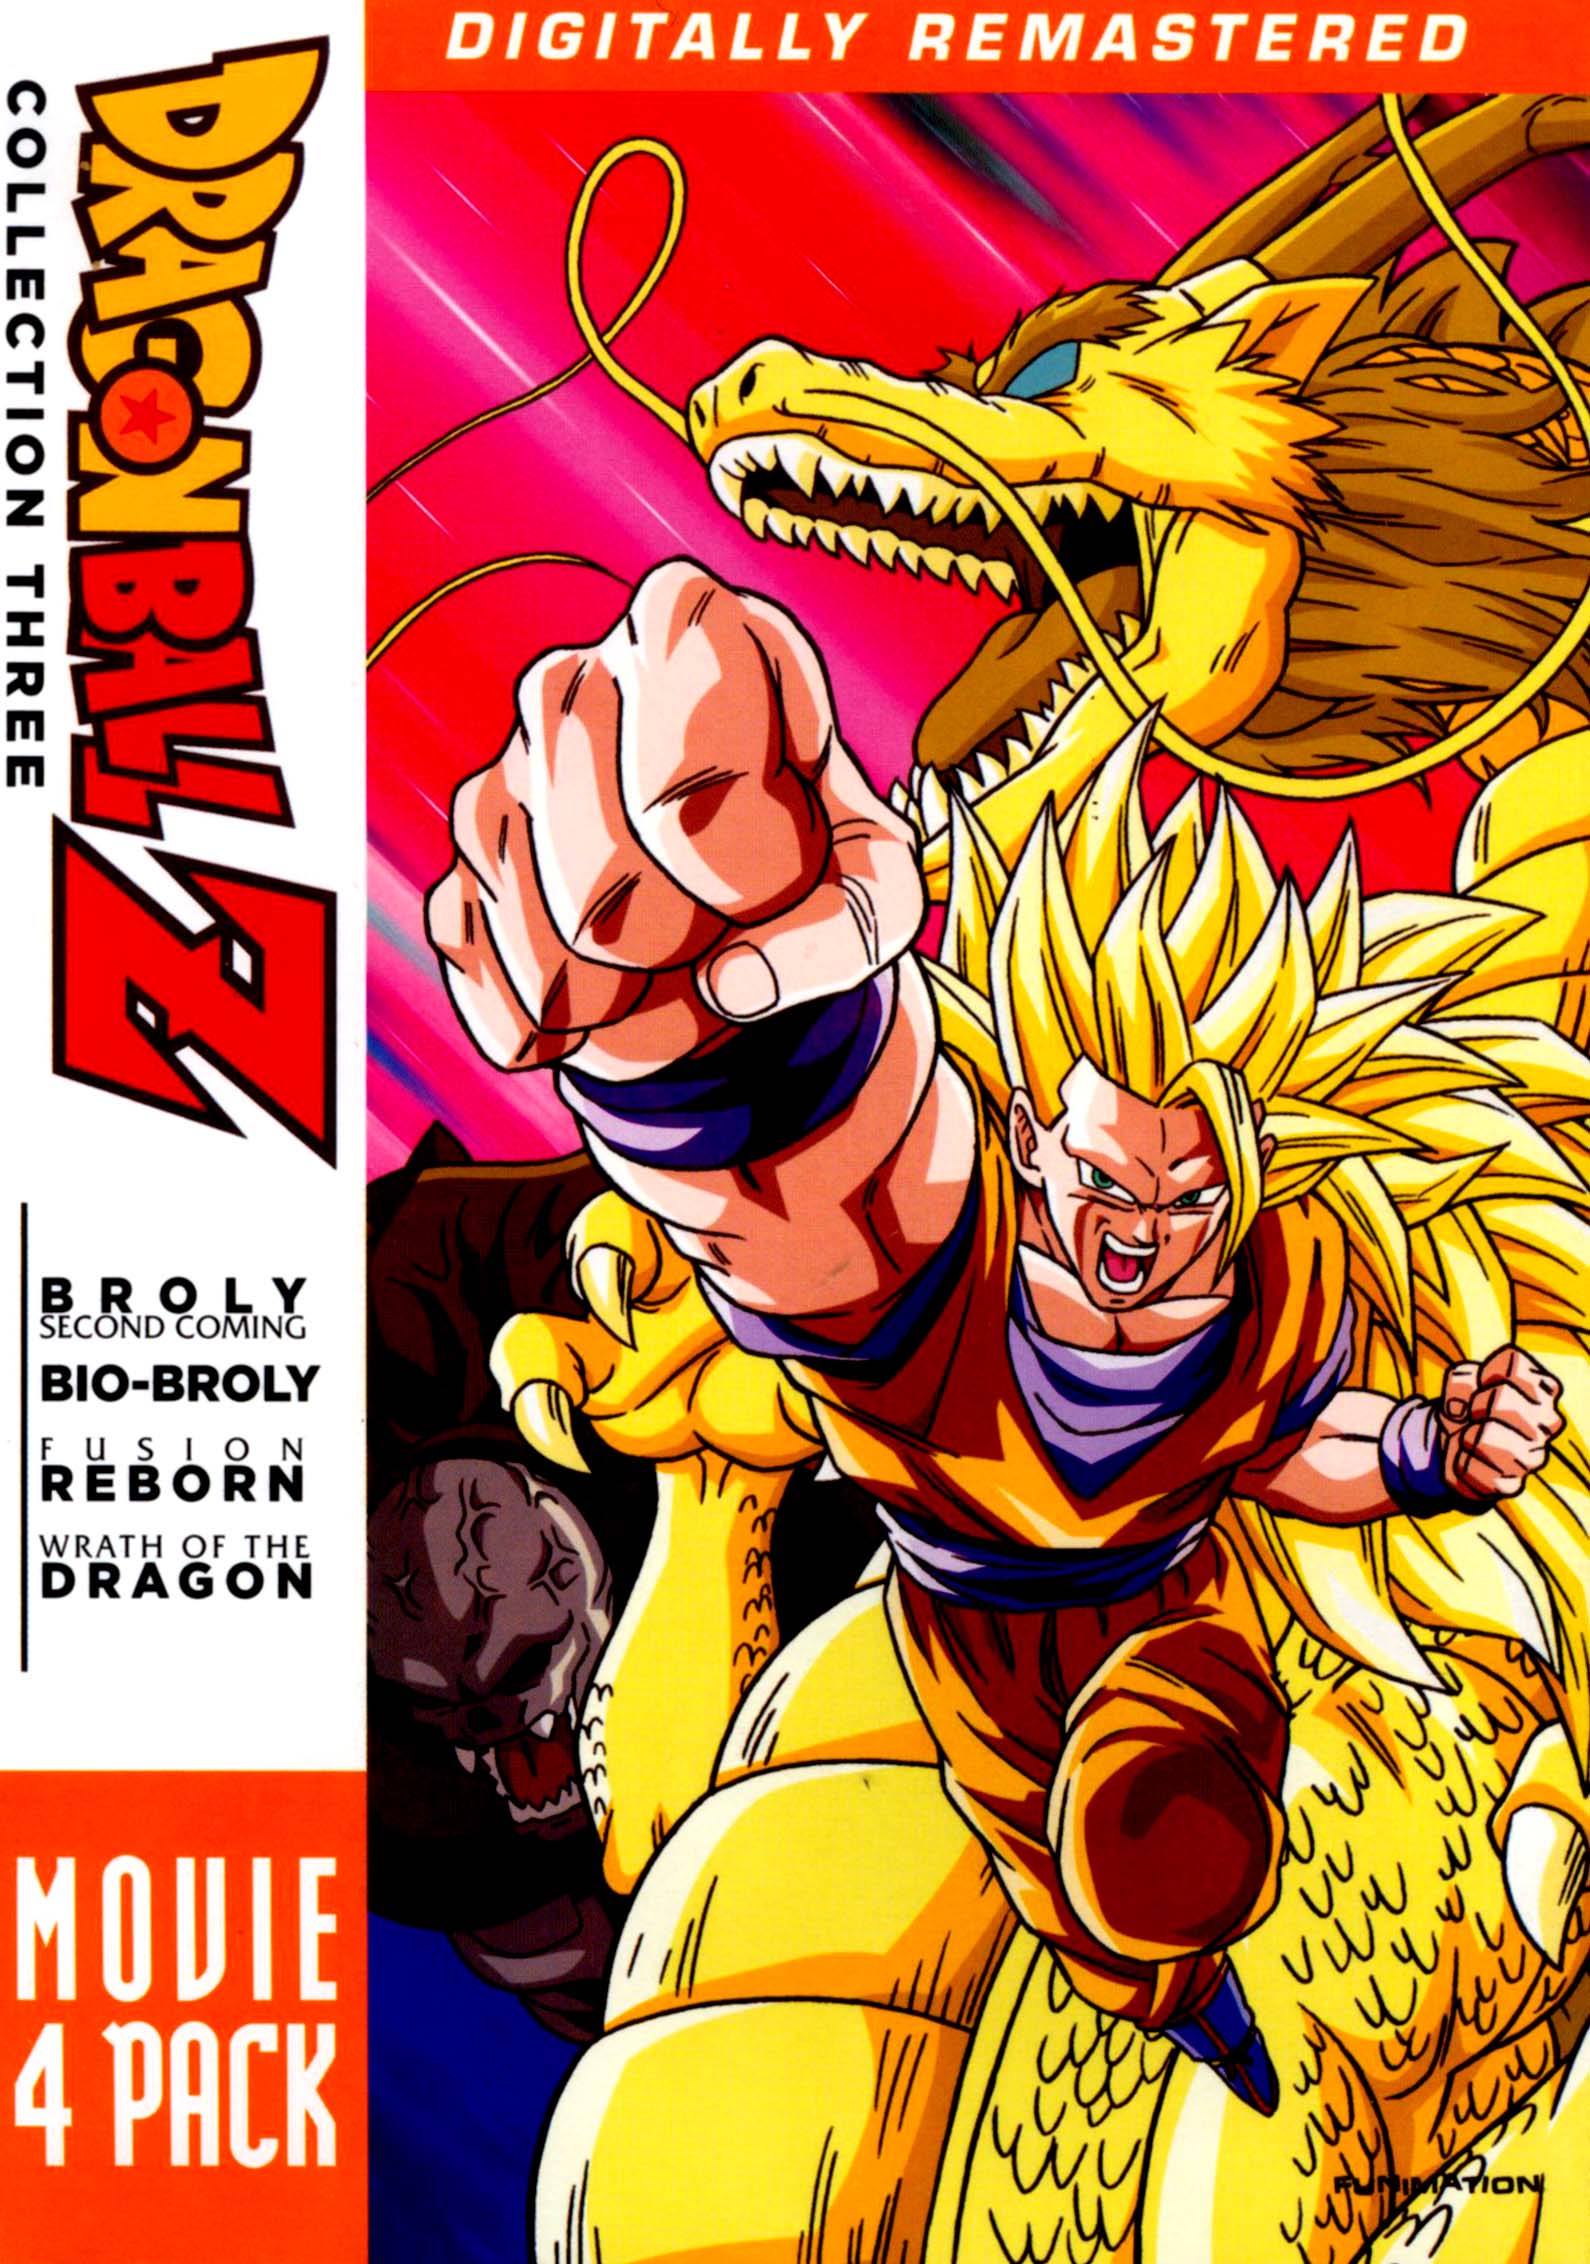 DragonBall Z: Movie 4 Pack - Collection Three [4 Discs] [DVD]